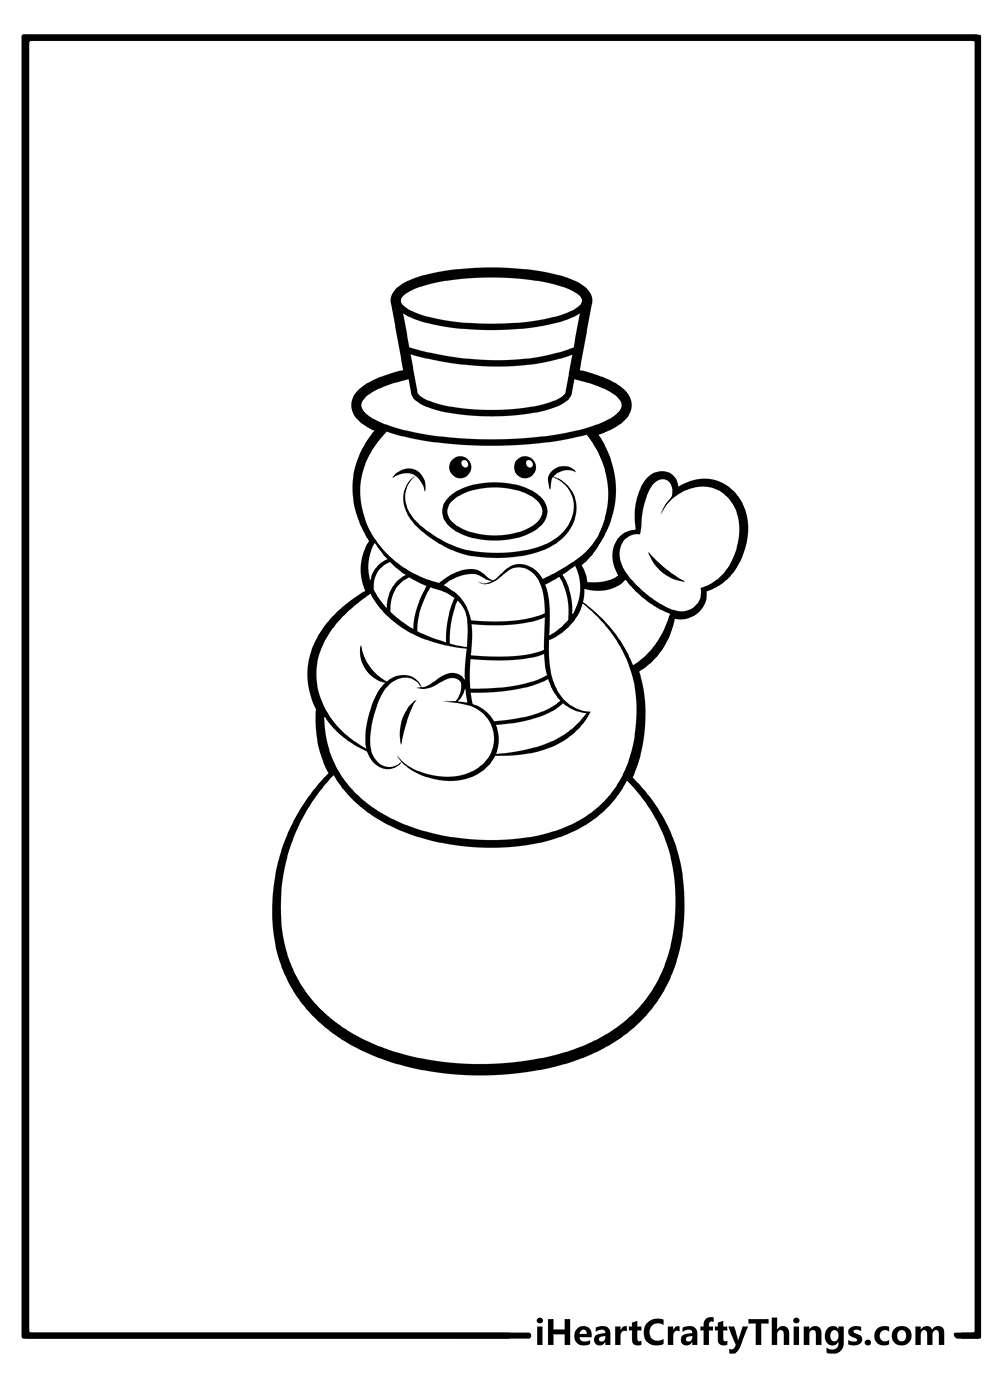 Snowman Christmas Coloring Pages free printable